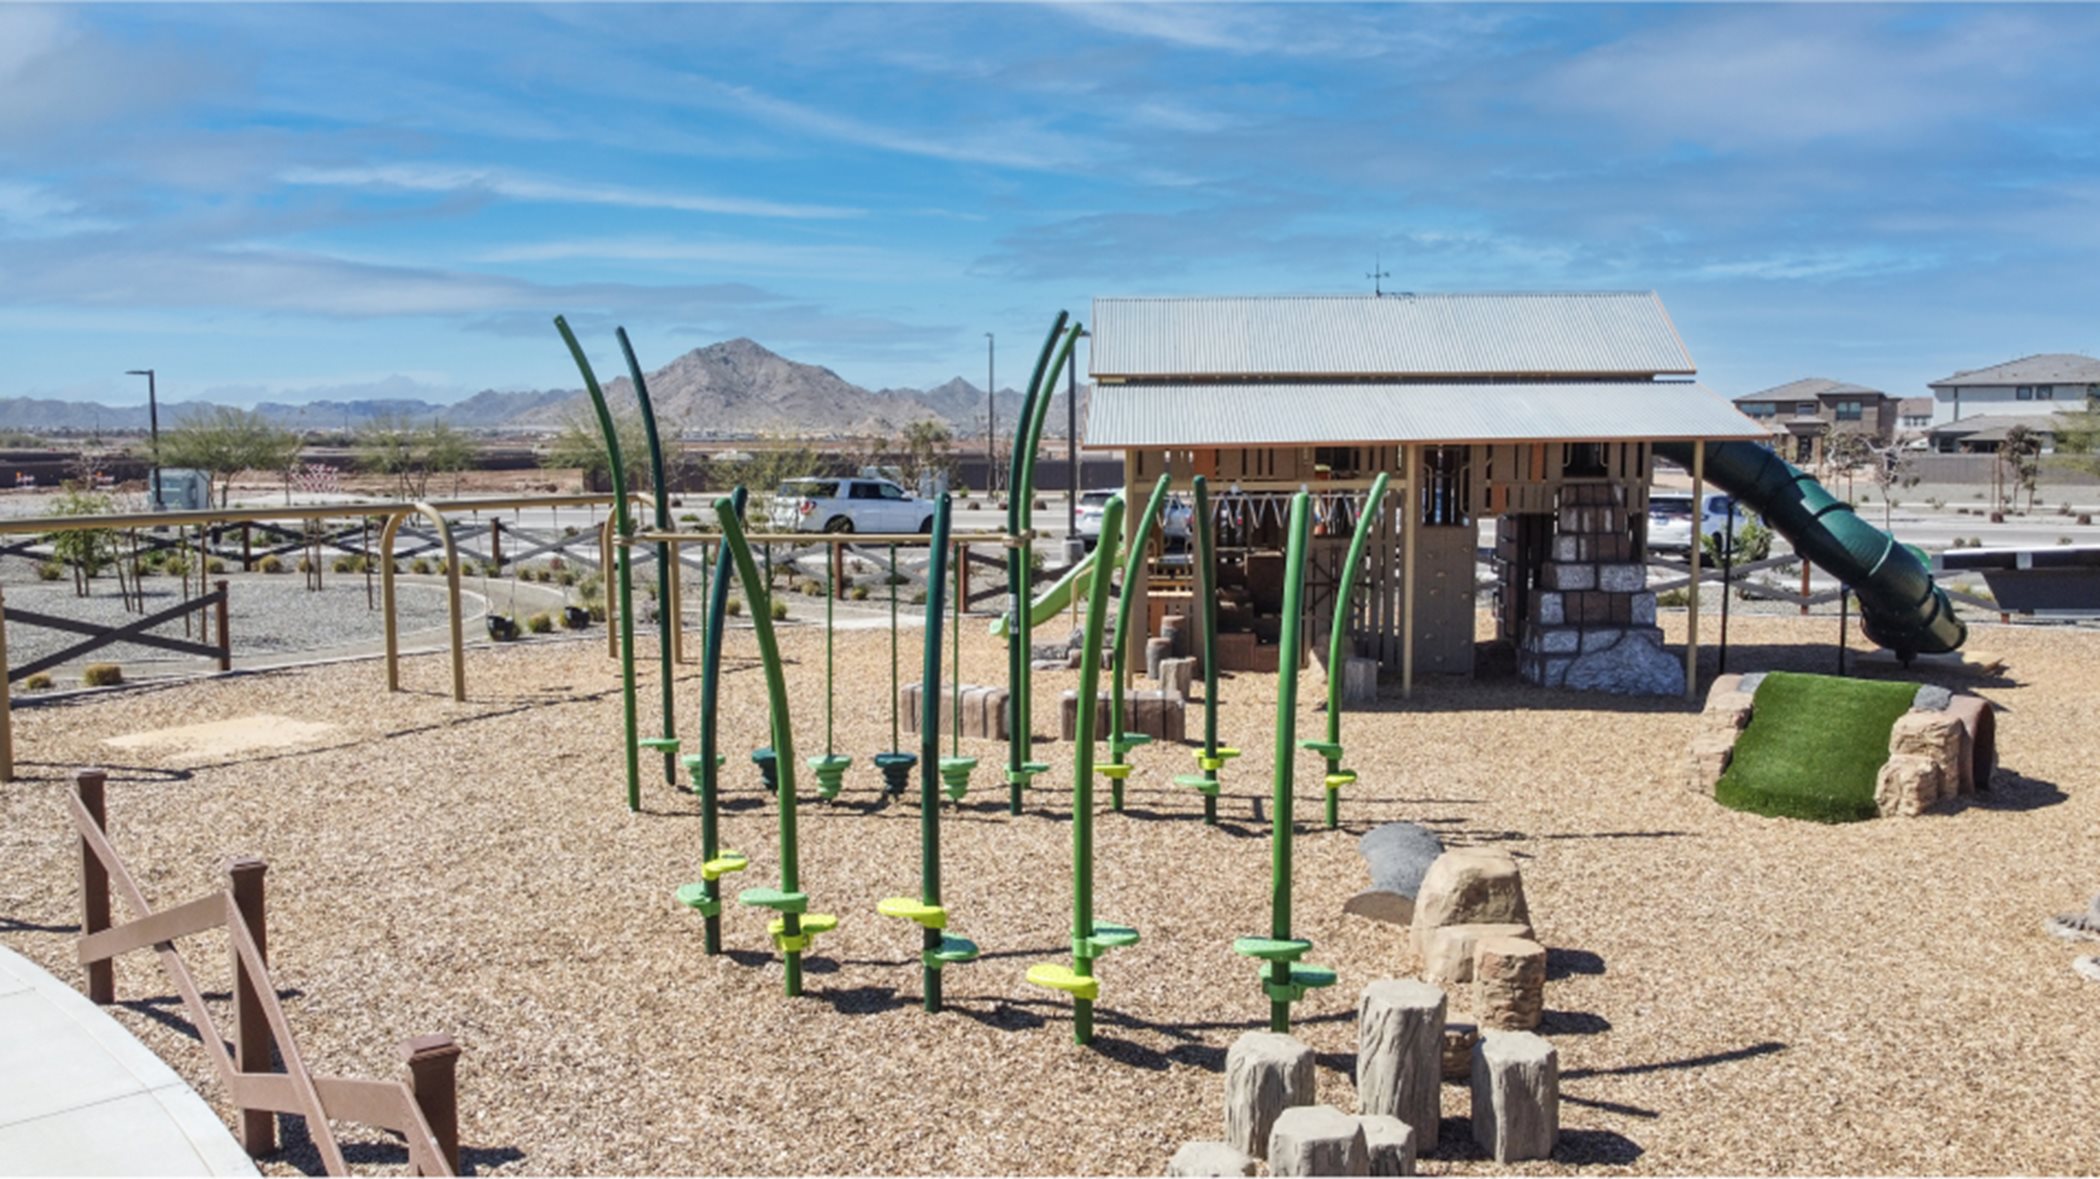 Close up of playground structures